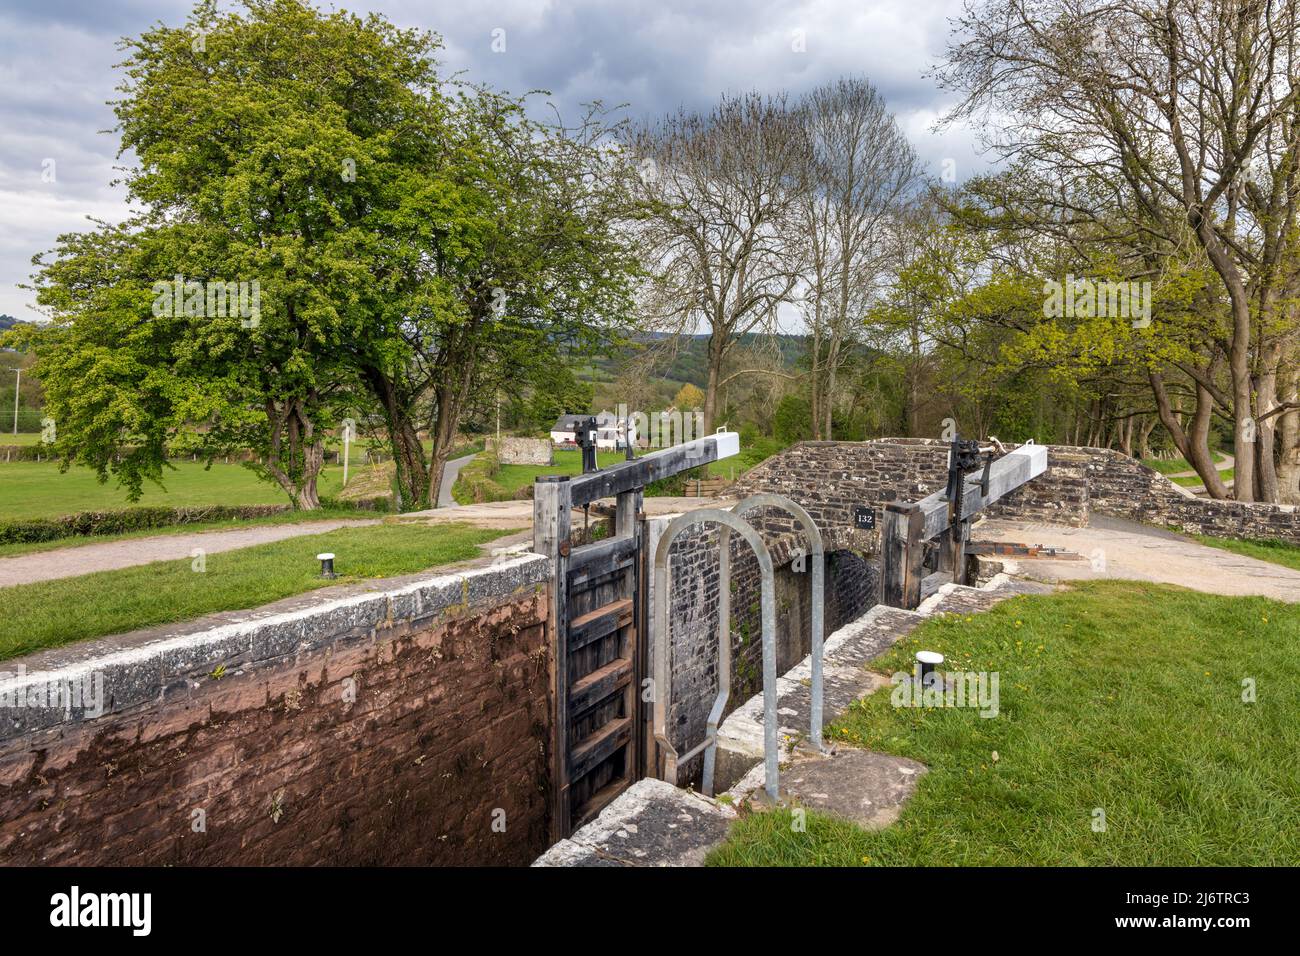 Lower Llangynidr Locks and Bridge 132 on the Monmouthshire and Brecon Canal in the Brecon Beacons National Park, South Wales. Stock Photo